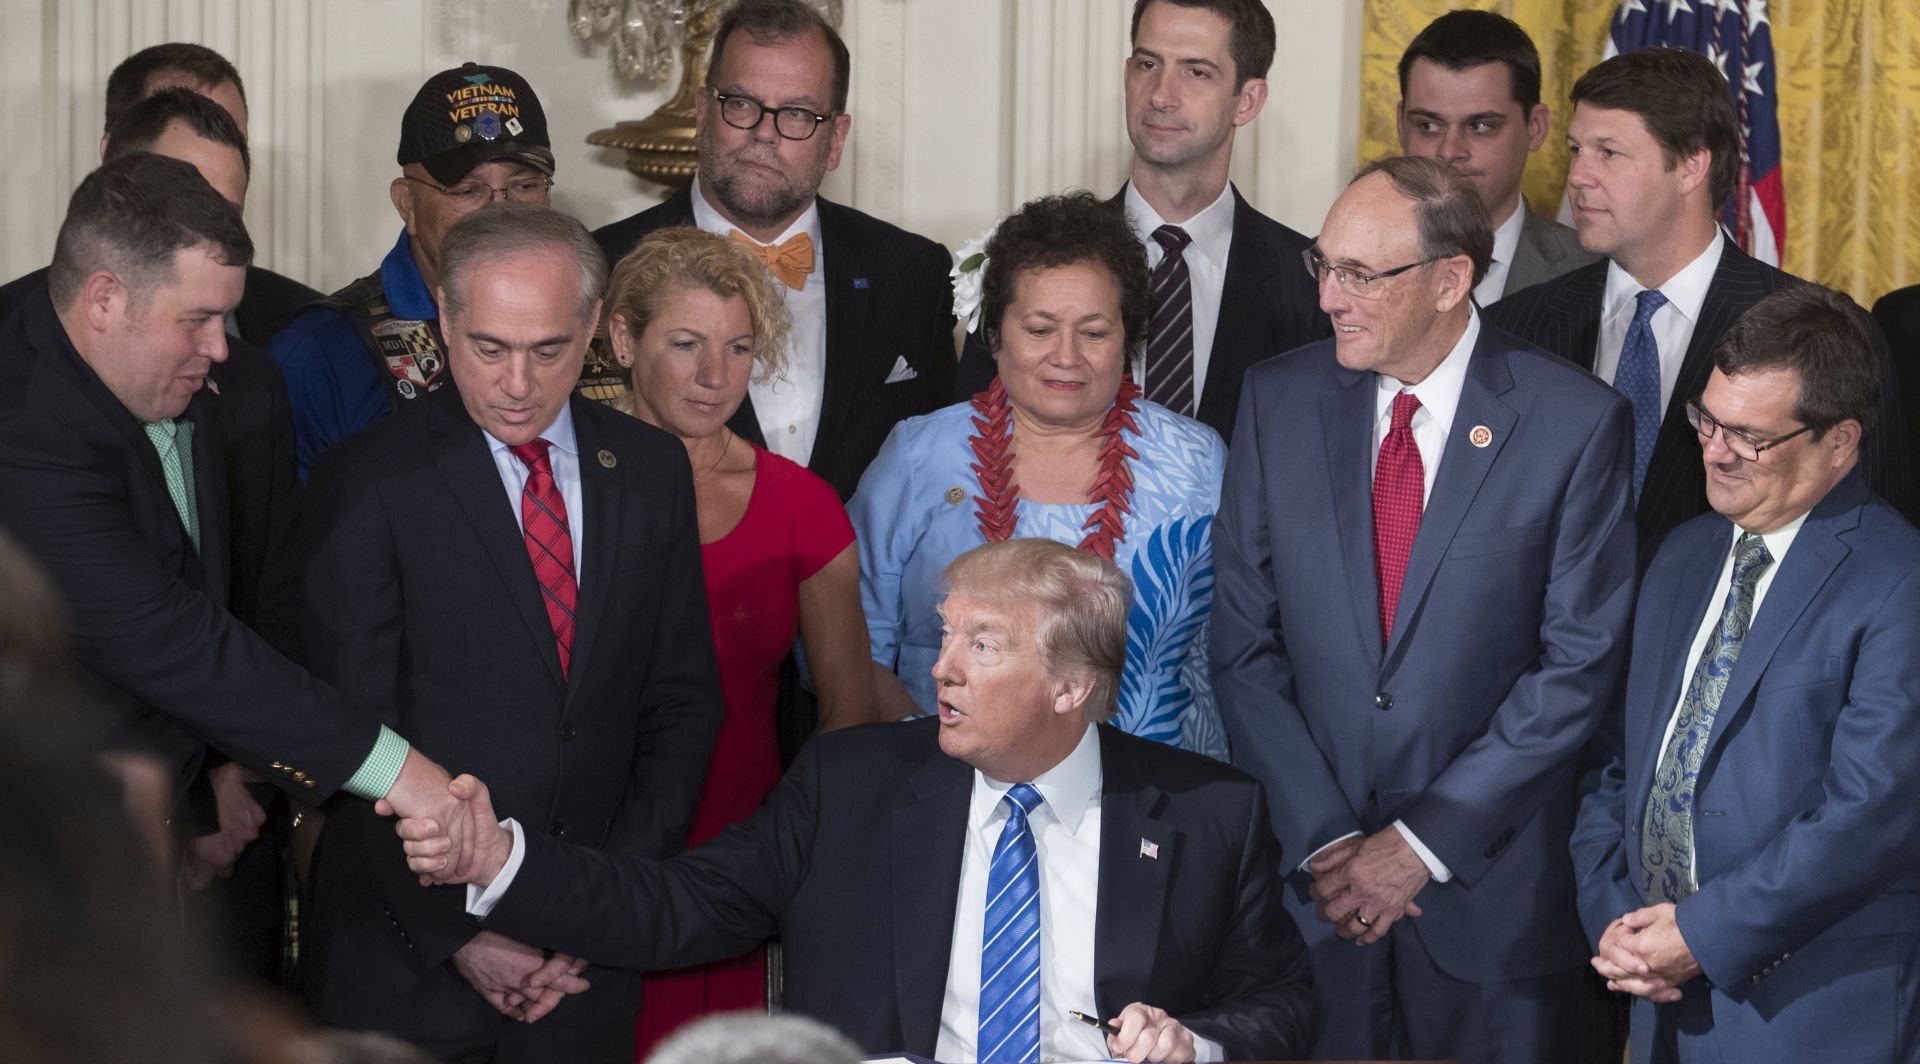 epa06046206 US President Donald J. Trump (C) shakes hands with retired US Army Sergeant Michael Verardo (L) beside Secretary of Veterans Affairs David Shulkin (2-L) at a signing ceremony for the Department of Veterans Affairs Accountability and Whistleblower Protection Act of 2017, in the East Room of the White House in Washington, DC, USA, 23 June 2017. The law is intended to raise the level of protection for whistleblowers in the Department of Veterans Affairs, in addition to making it easier to discipline and fire employees.  EPA/MICHAEL REYNOLDS